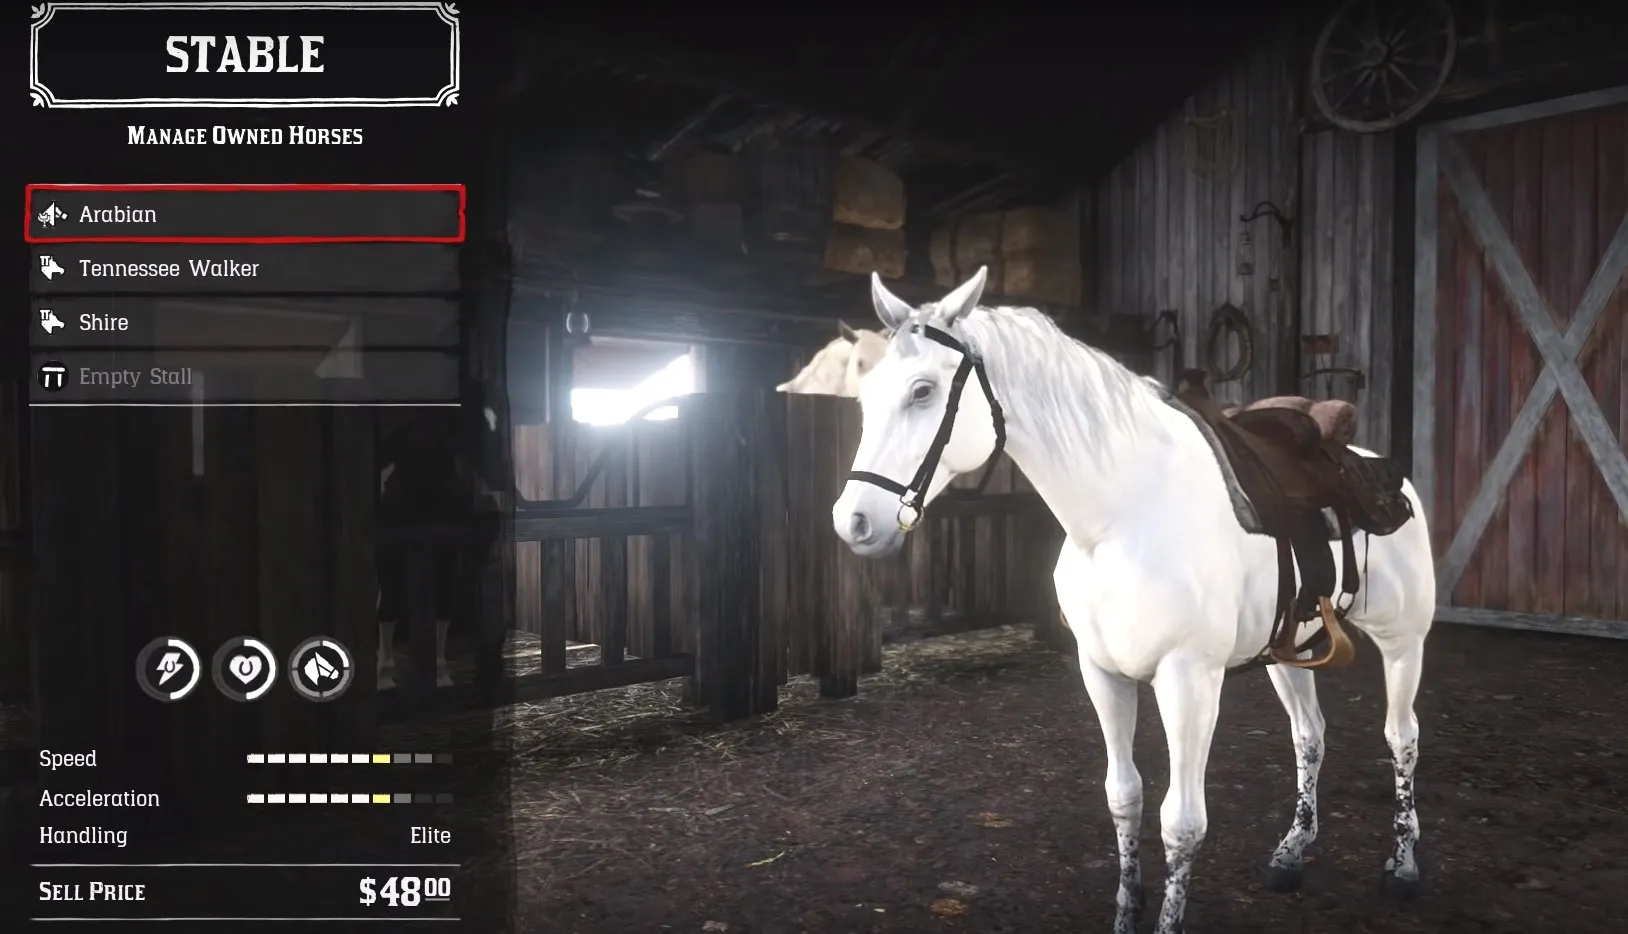 How To Get The Fastest Rarest Horses In Red Dead Redemption 2 - im a horse random wild riding horses lets play online roblox